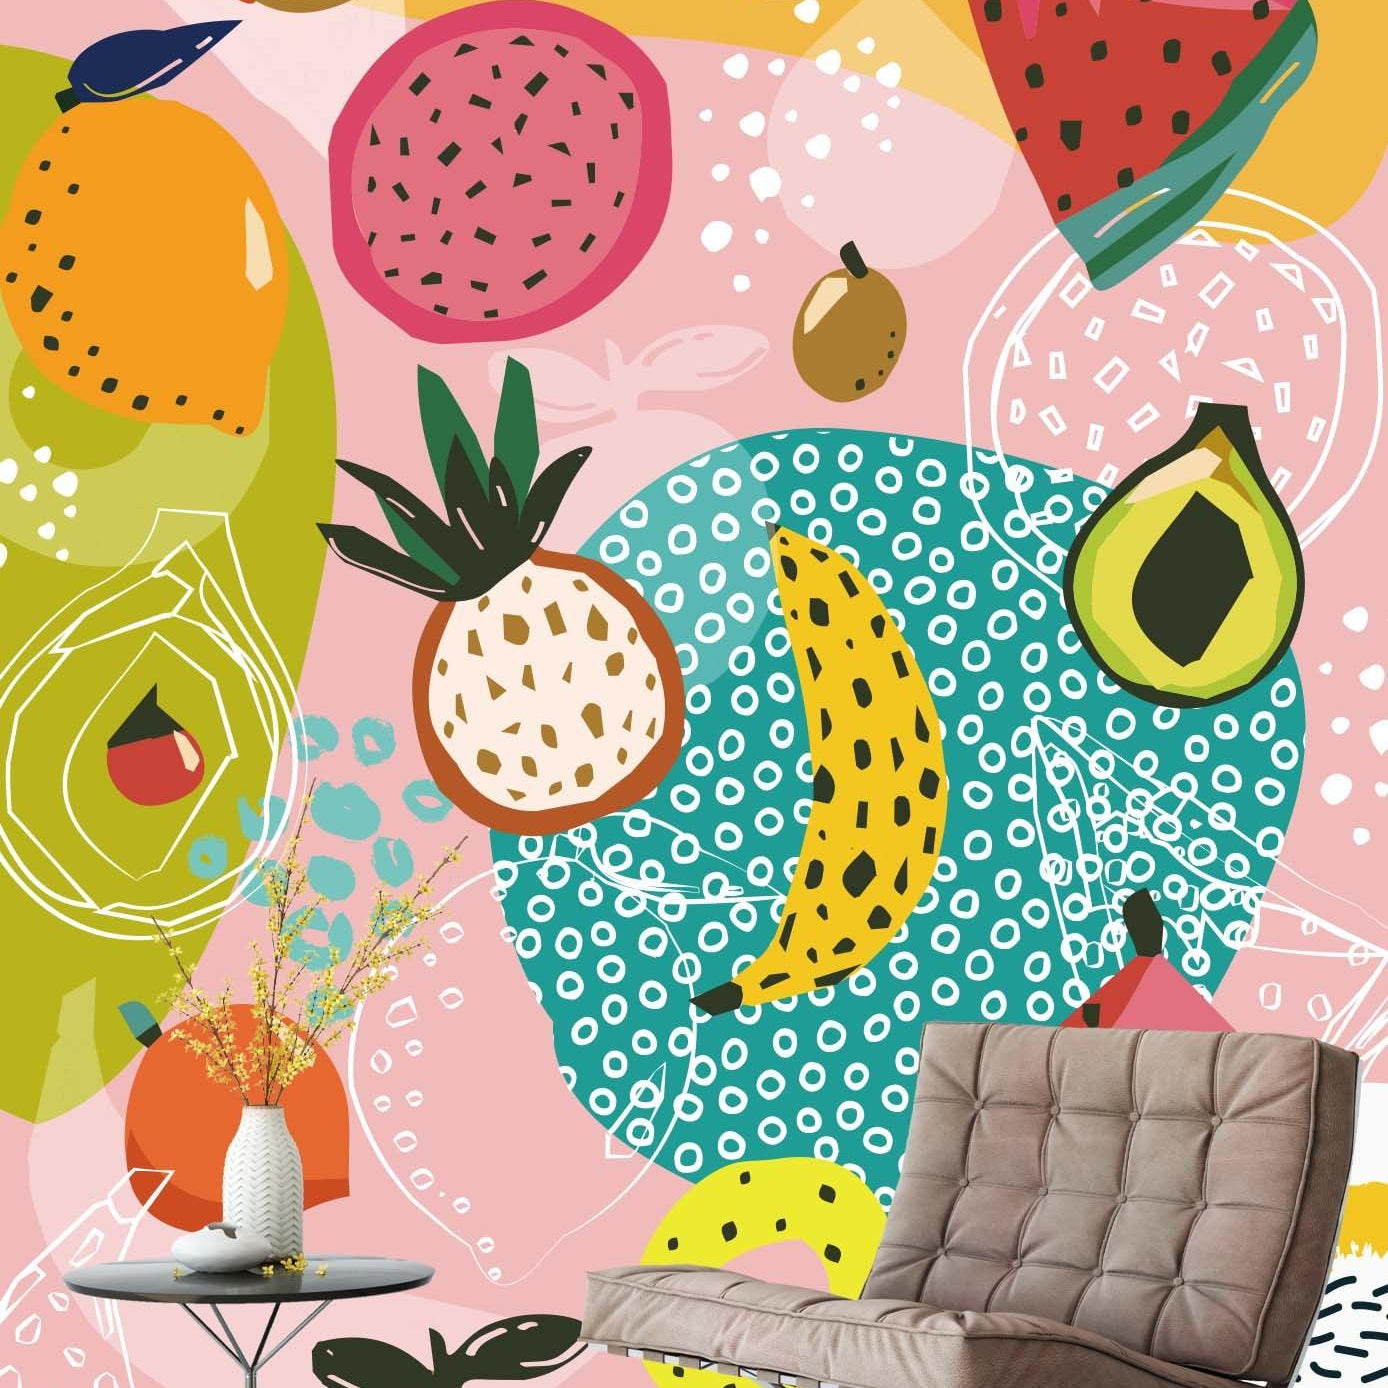 3D Hand Sketching Colorful Fruity Wall Mural Wallpaper LXL 1109- Jess Art Decoration